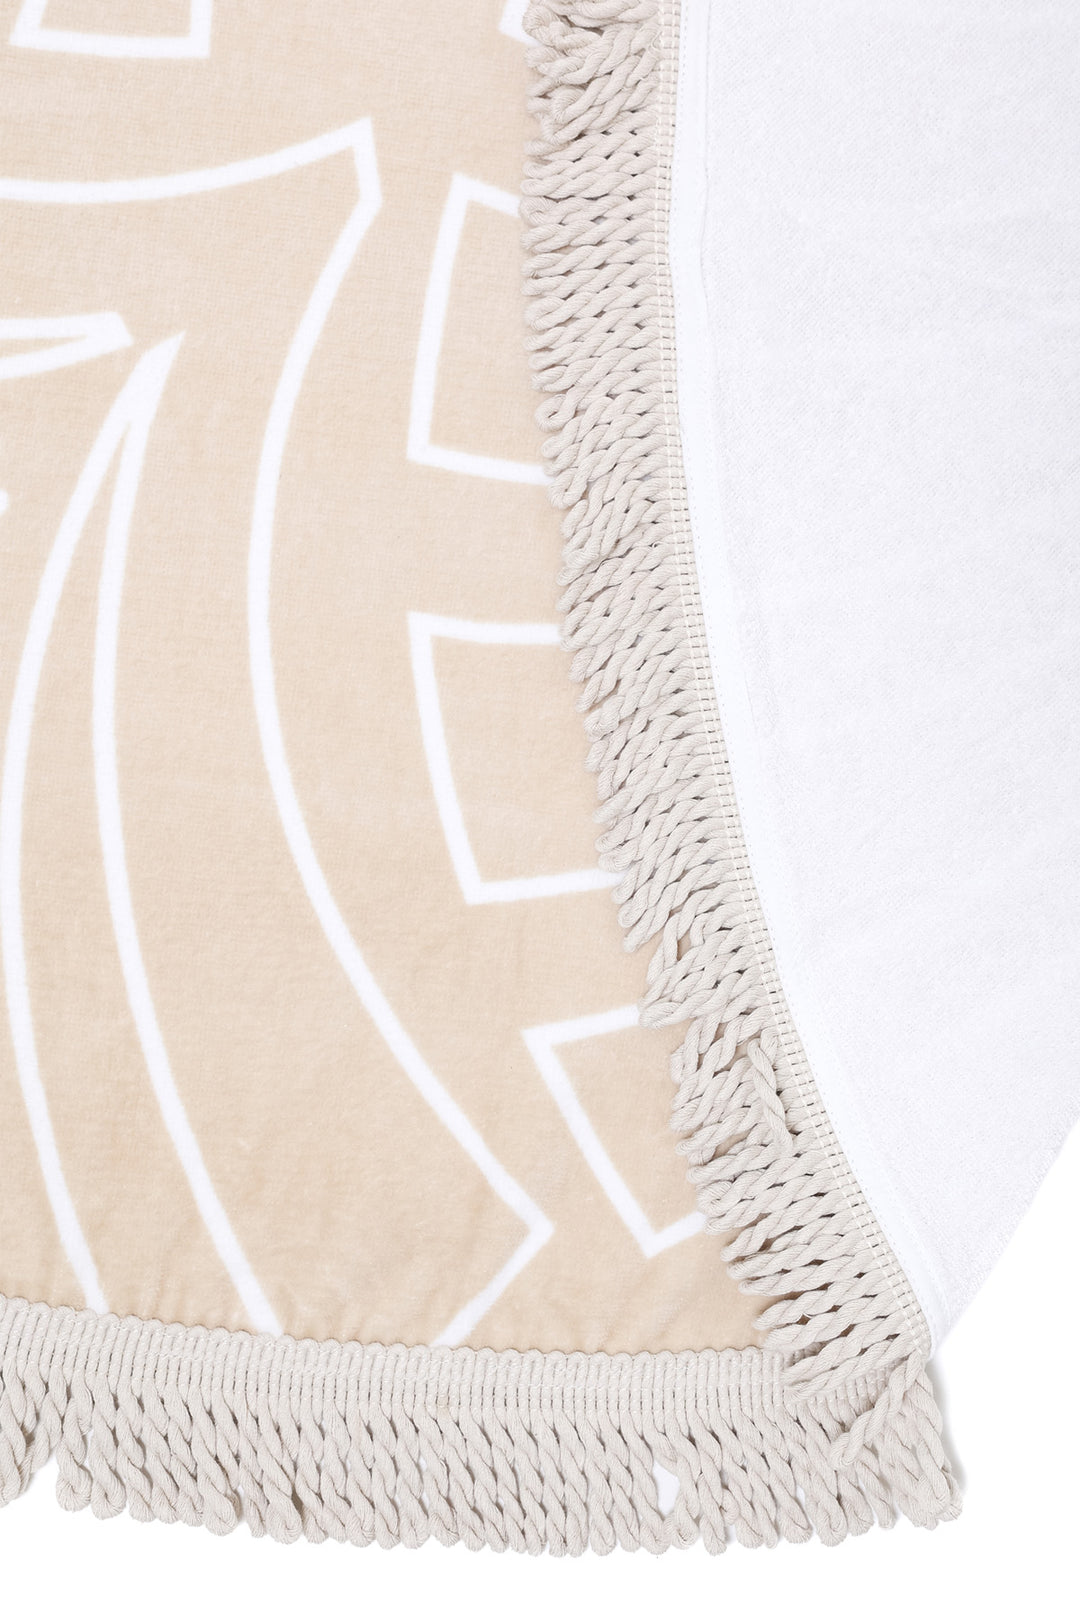 THE PALM | Velour Round Towel